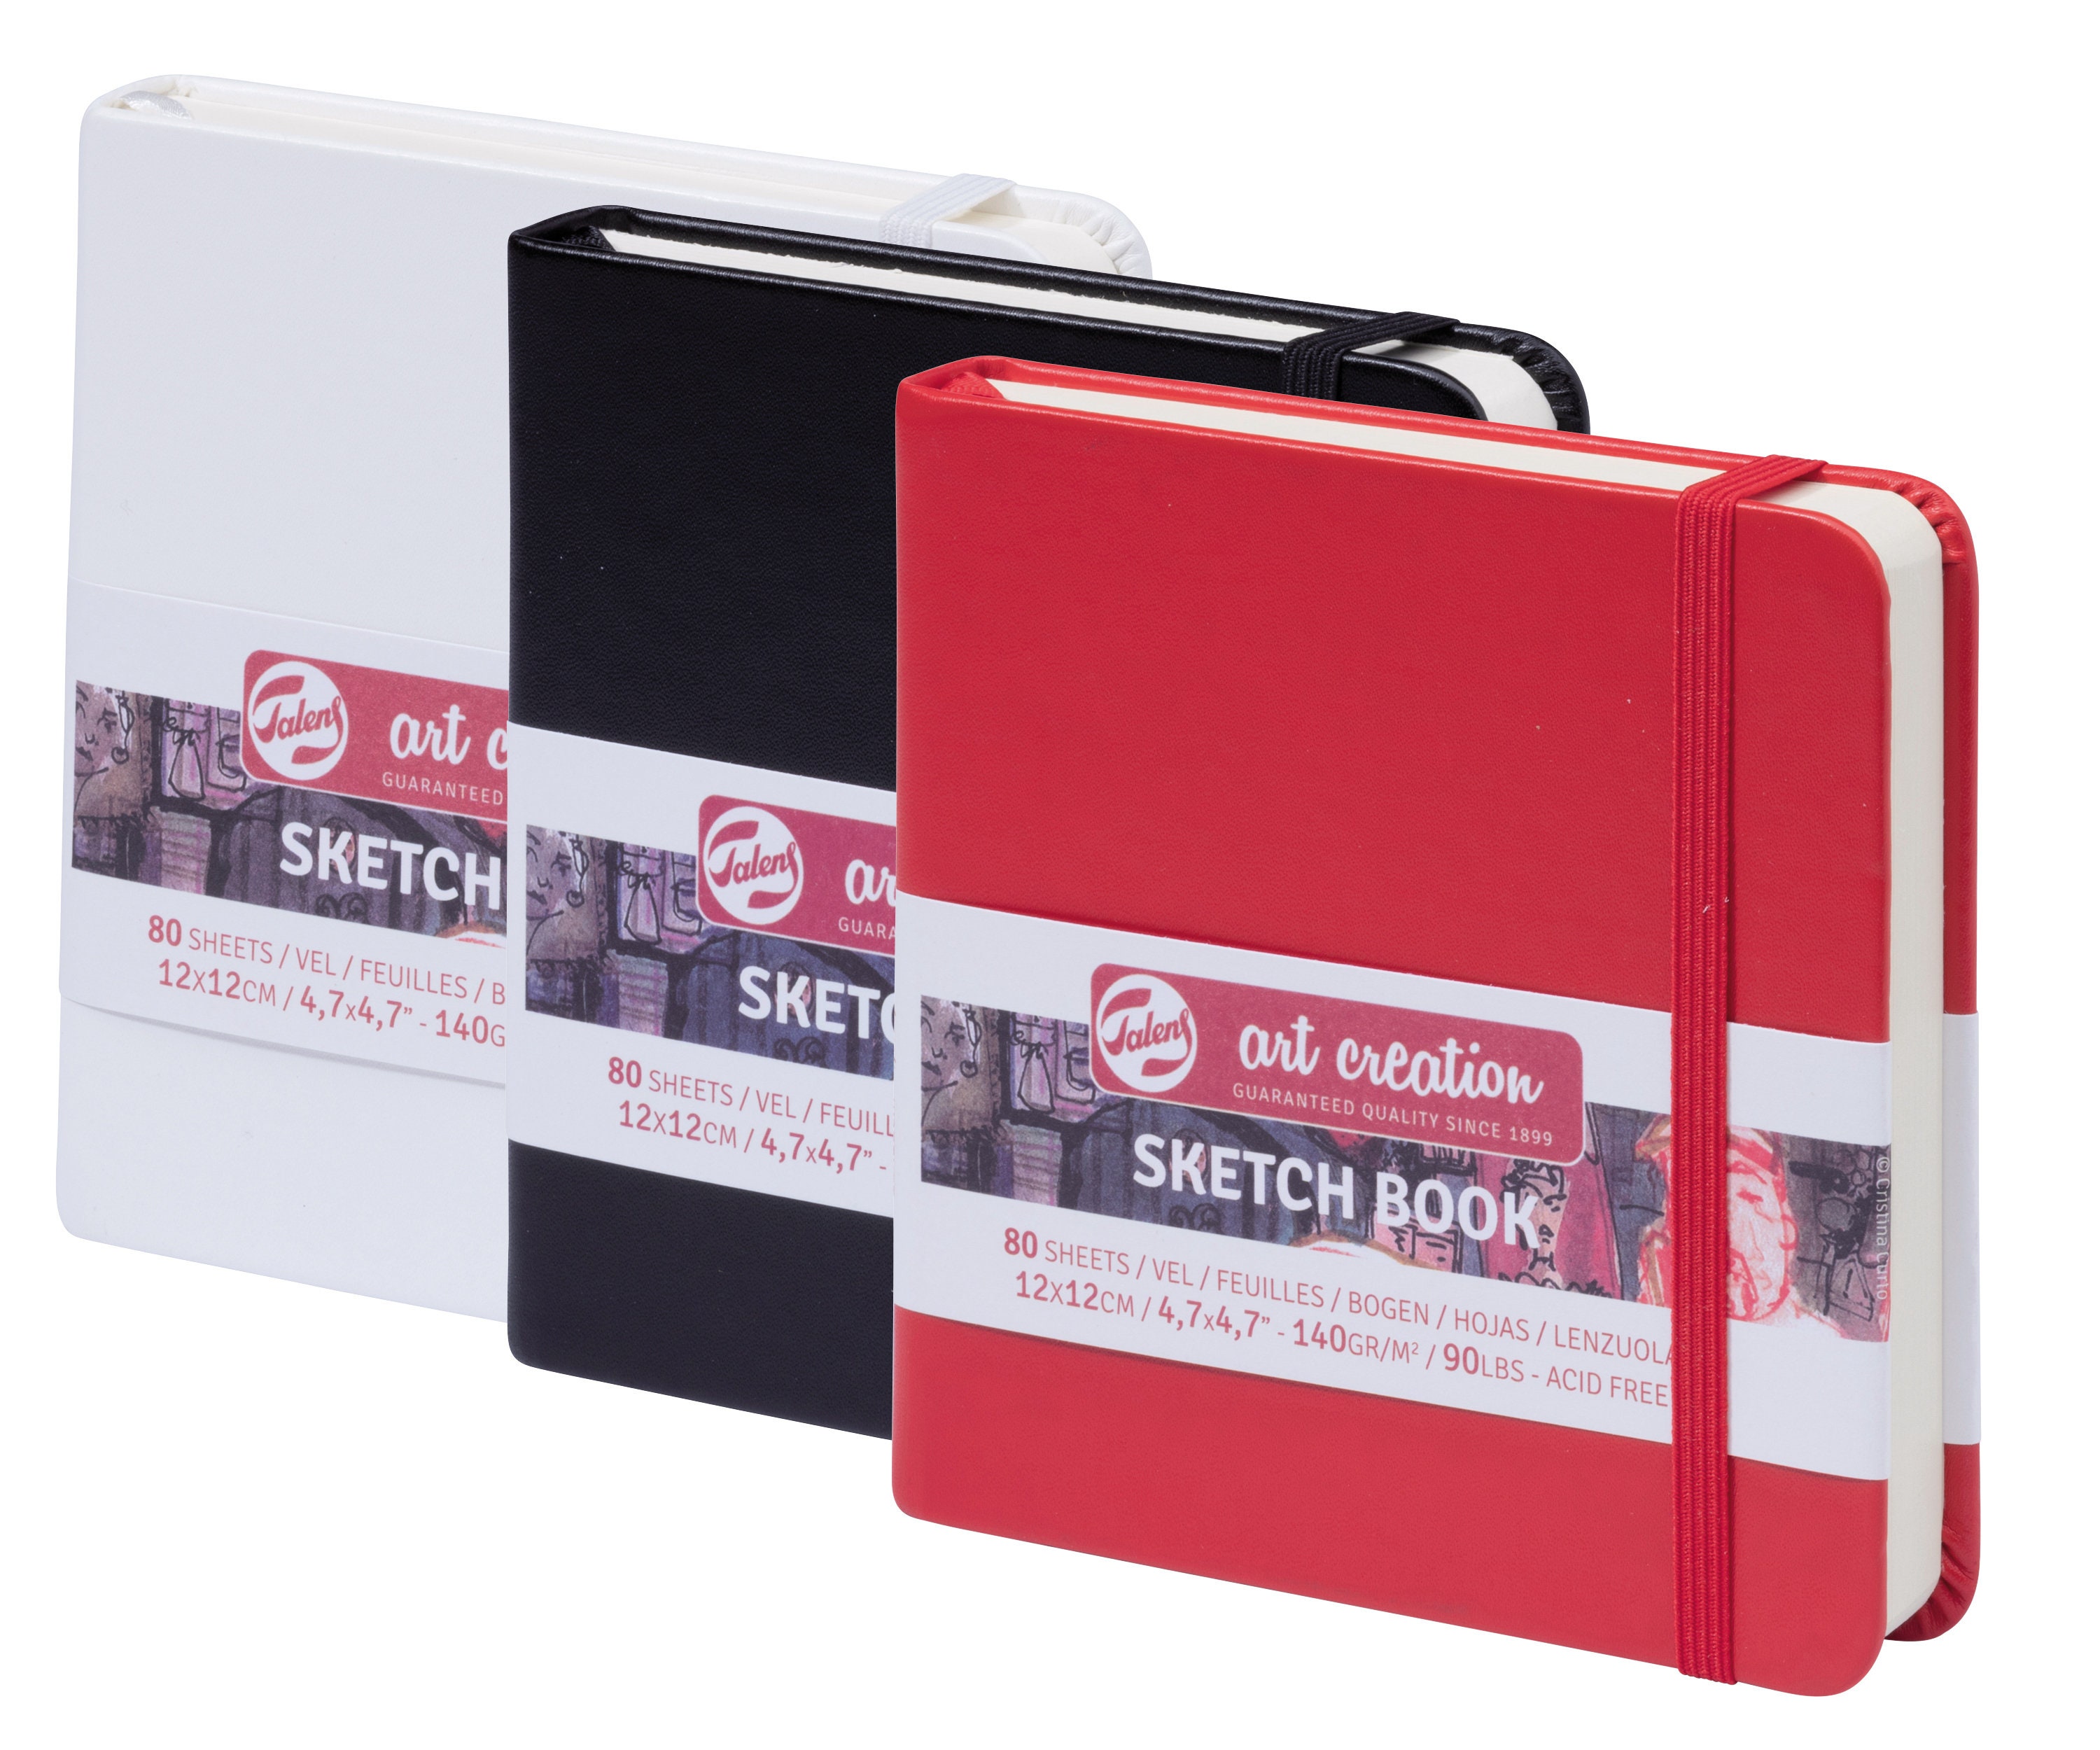 Top Secret Sketchbook Small Sketch Pad Drawing Book 5.5 X 8.5 Size